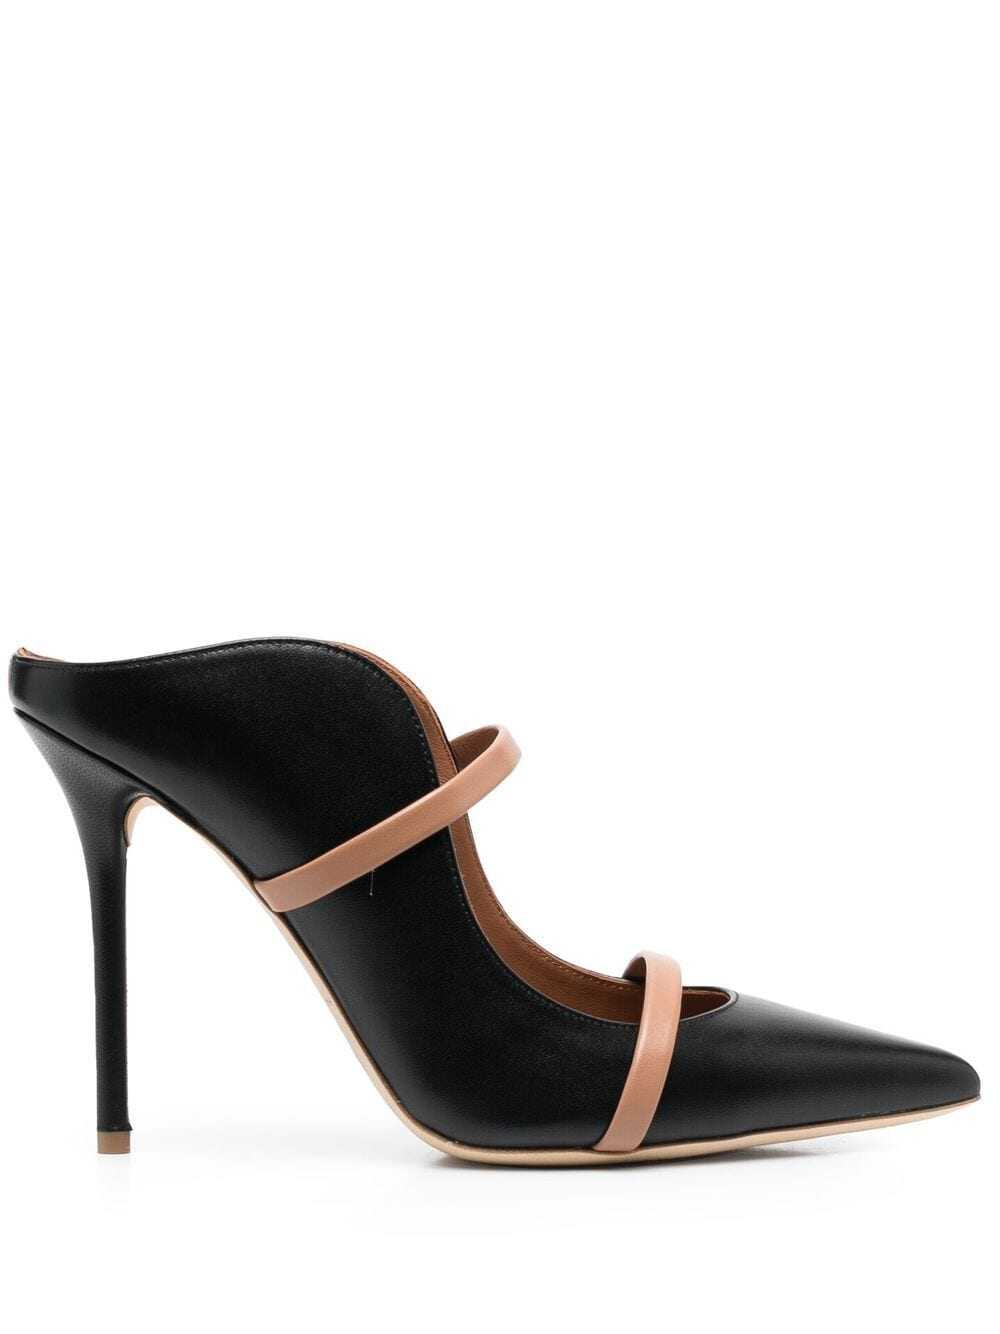 MALONE SOULIERS Malone Souliers With Heel Black Black